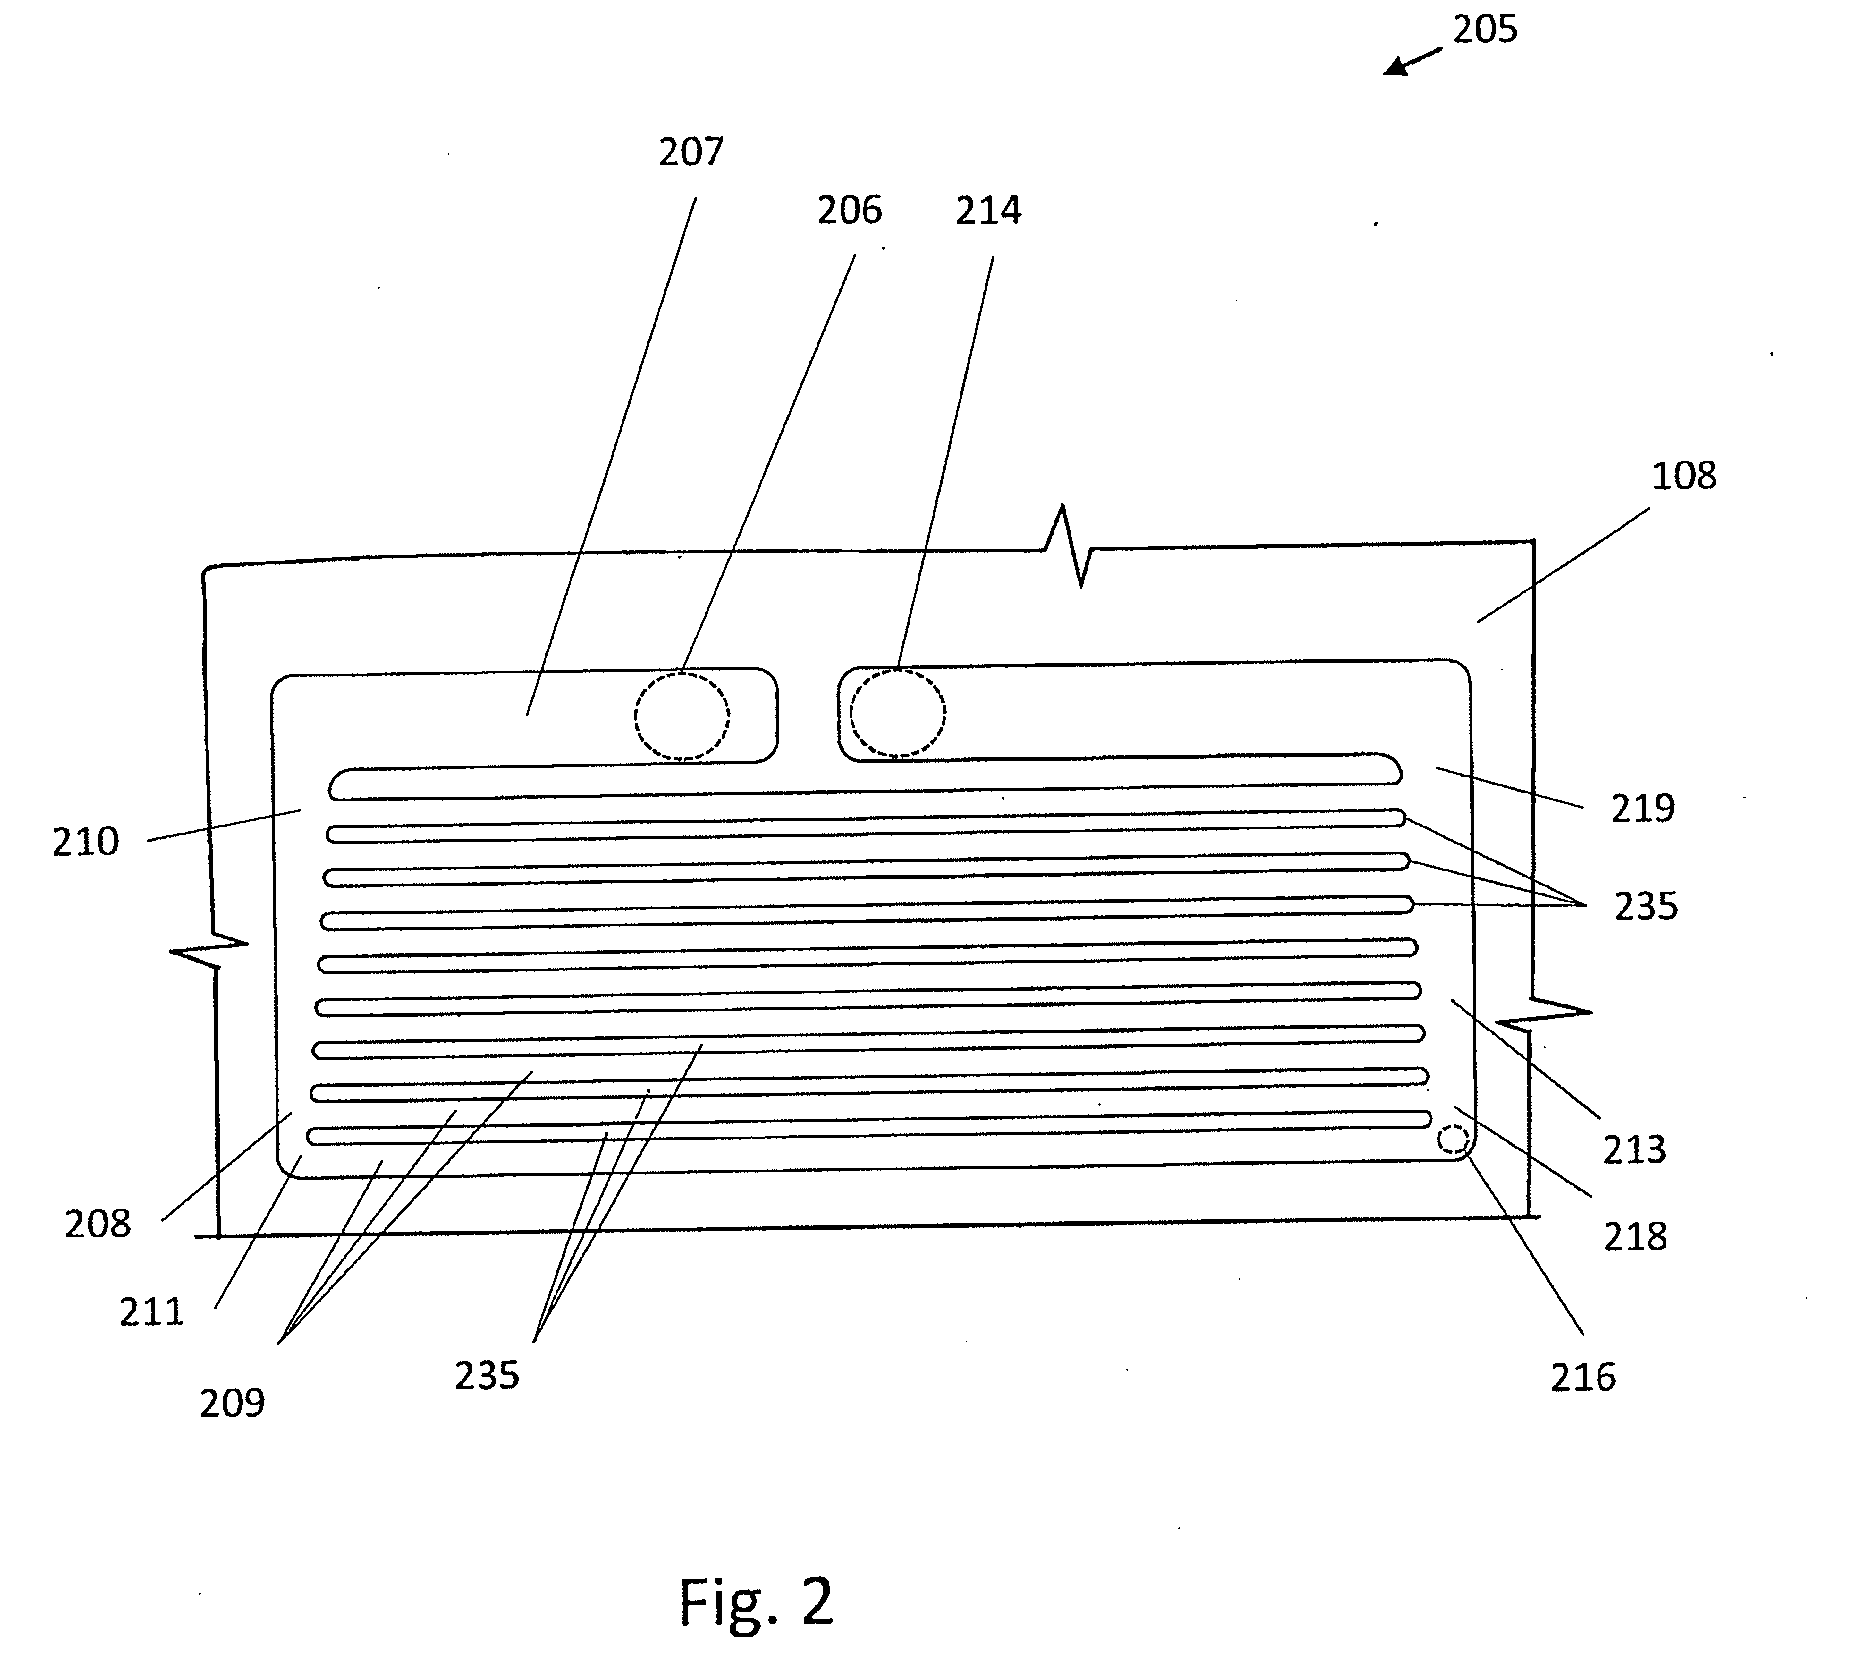 Proportional Micro-Valve With Thermal Feedback